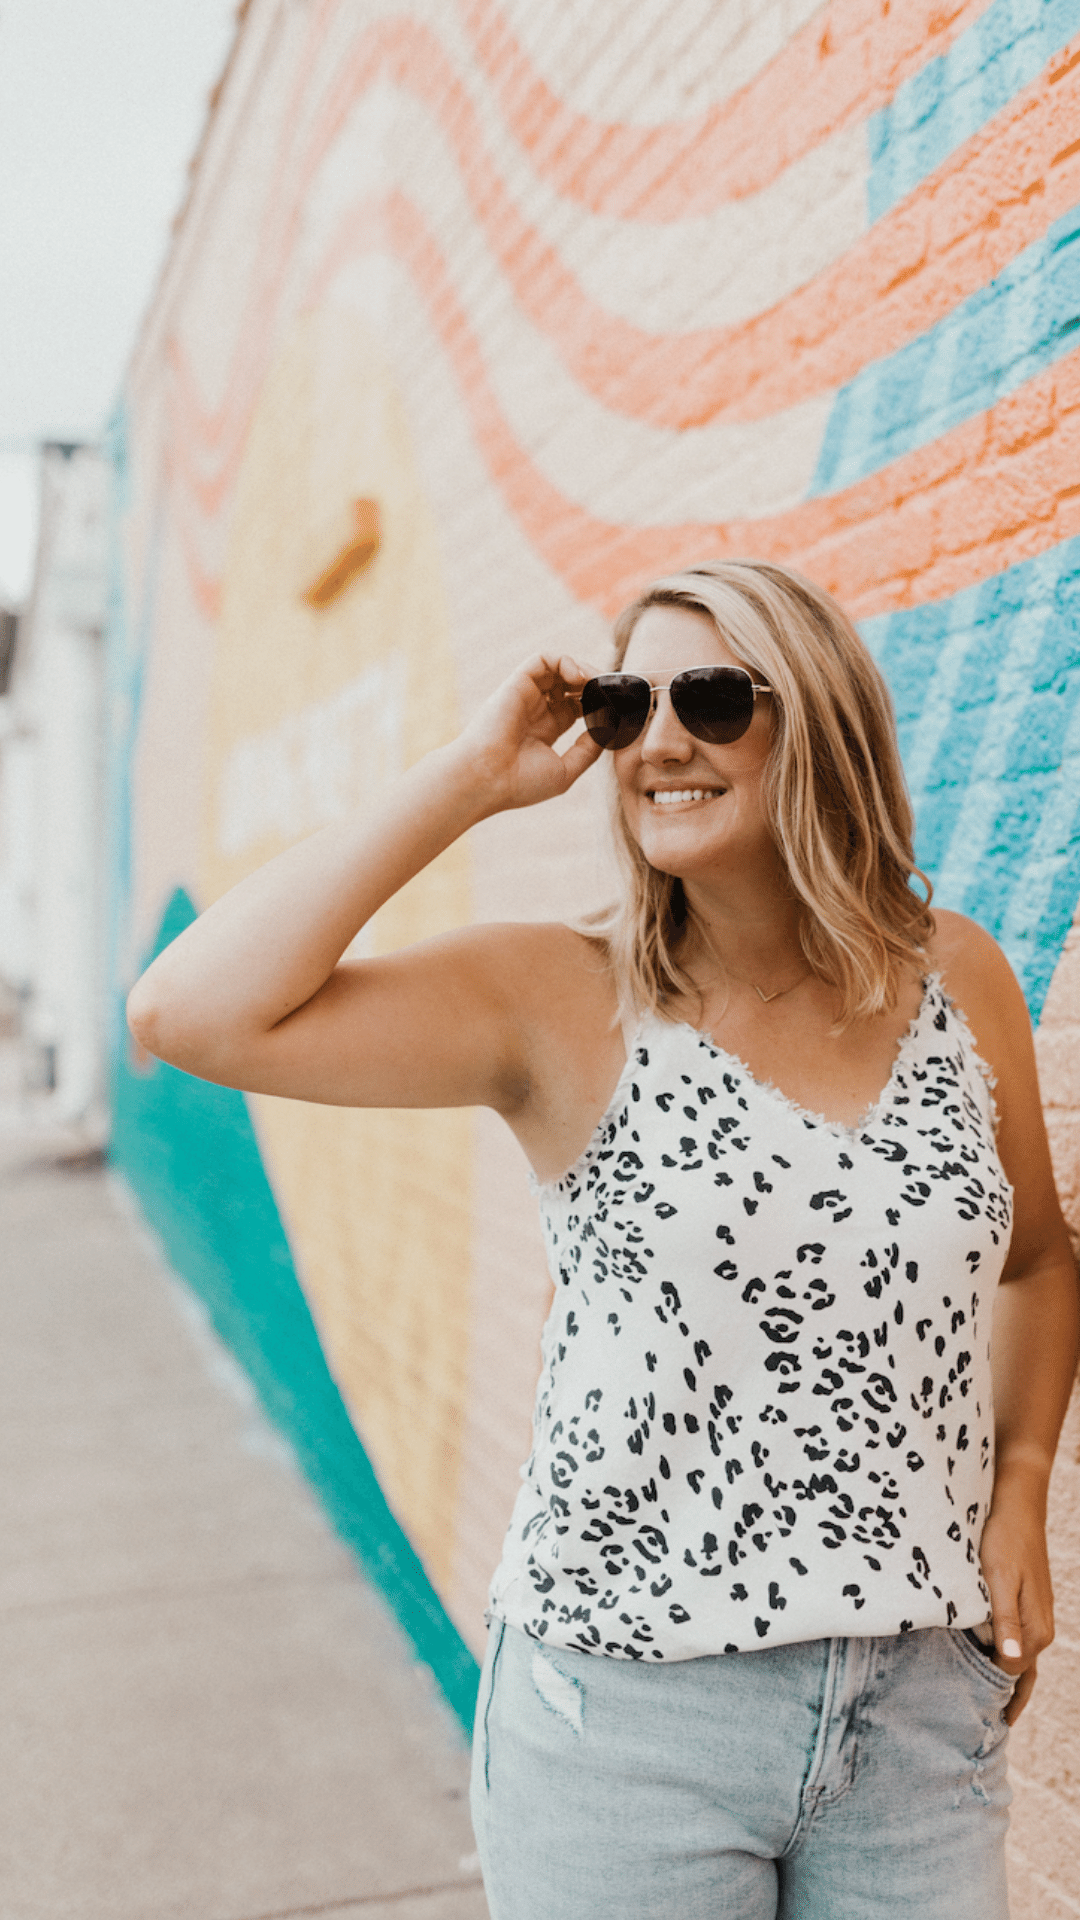 blonde woman posing with sunglasses - talks about how to build your personal brand